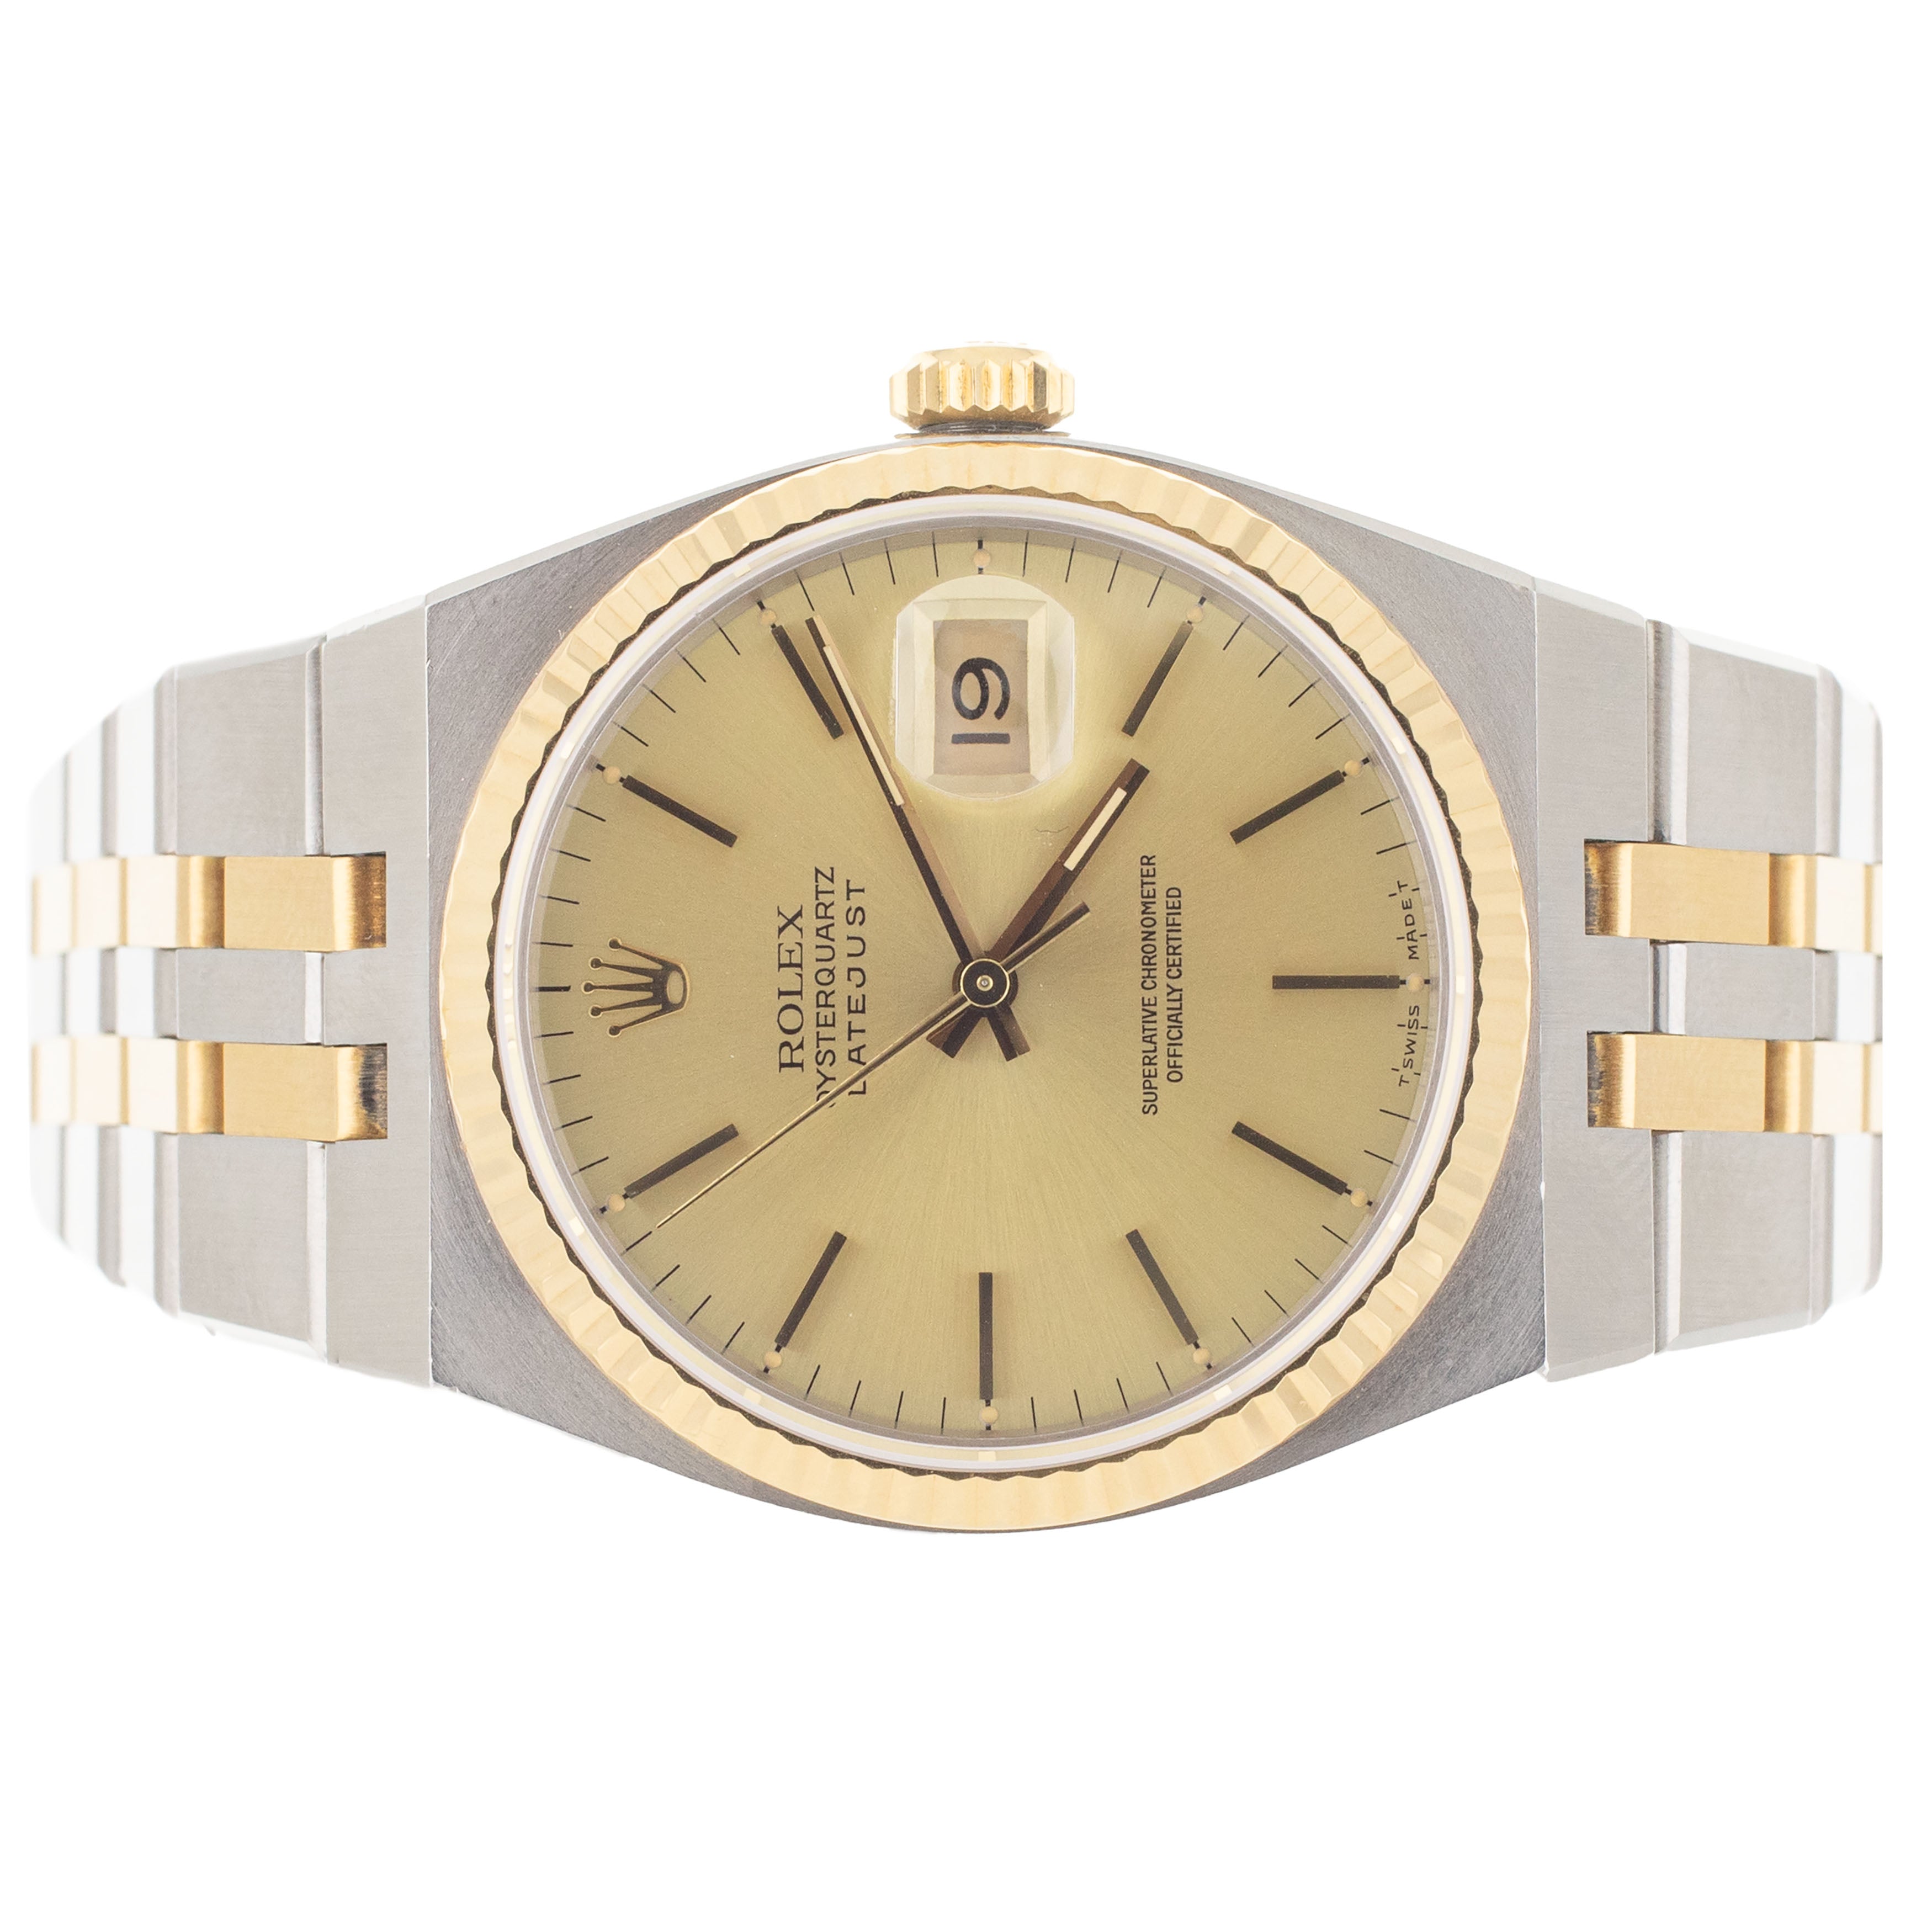 Rolex Datejust Oysterquartz Stainless Steel Gold Dial 36mm 17013